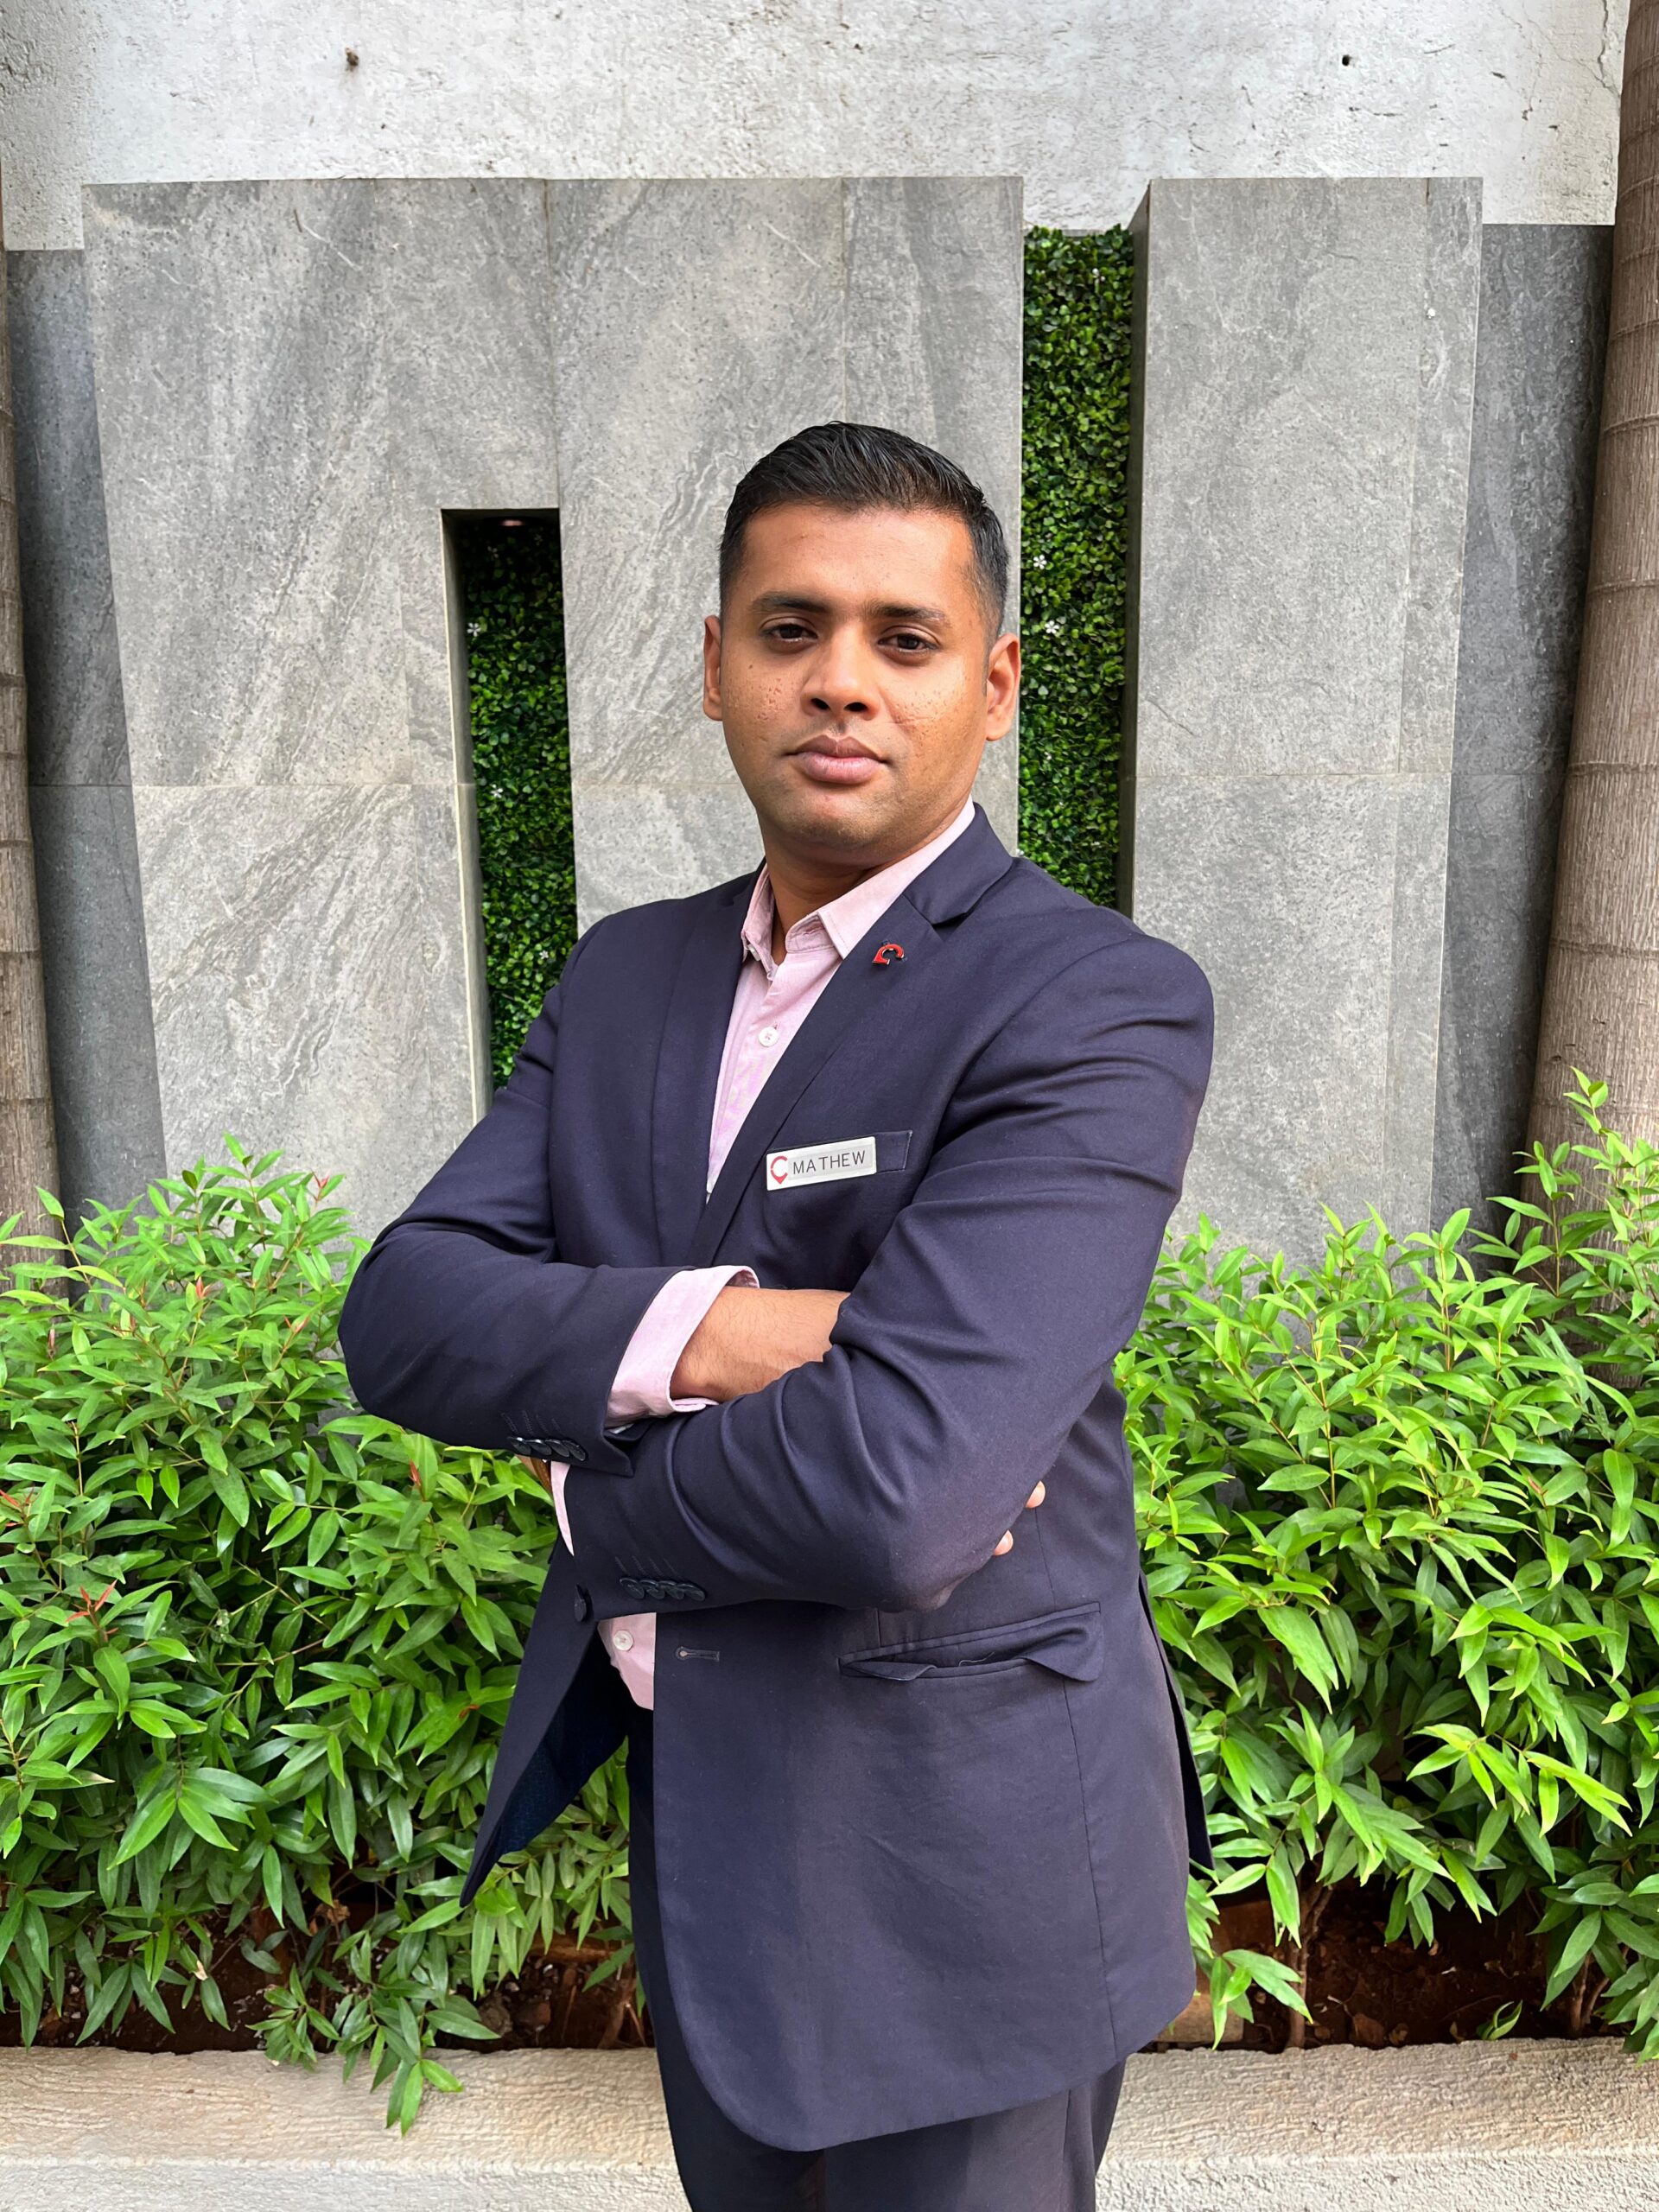 Hyatt Centric Juhu Bolsters Leadership Team with Appointment of New Human Resources Manager, Mathew Joseph